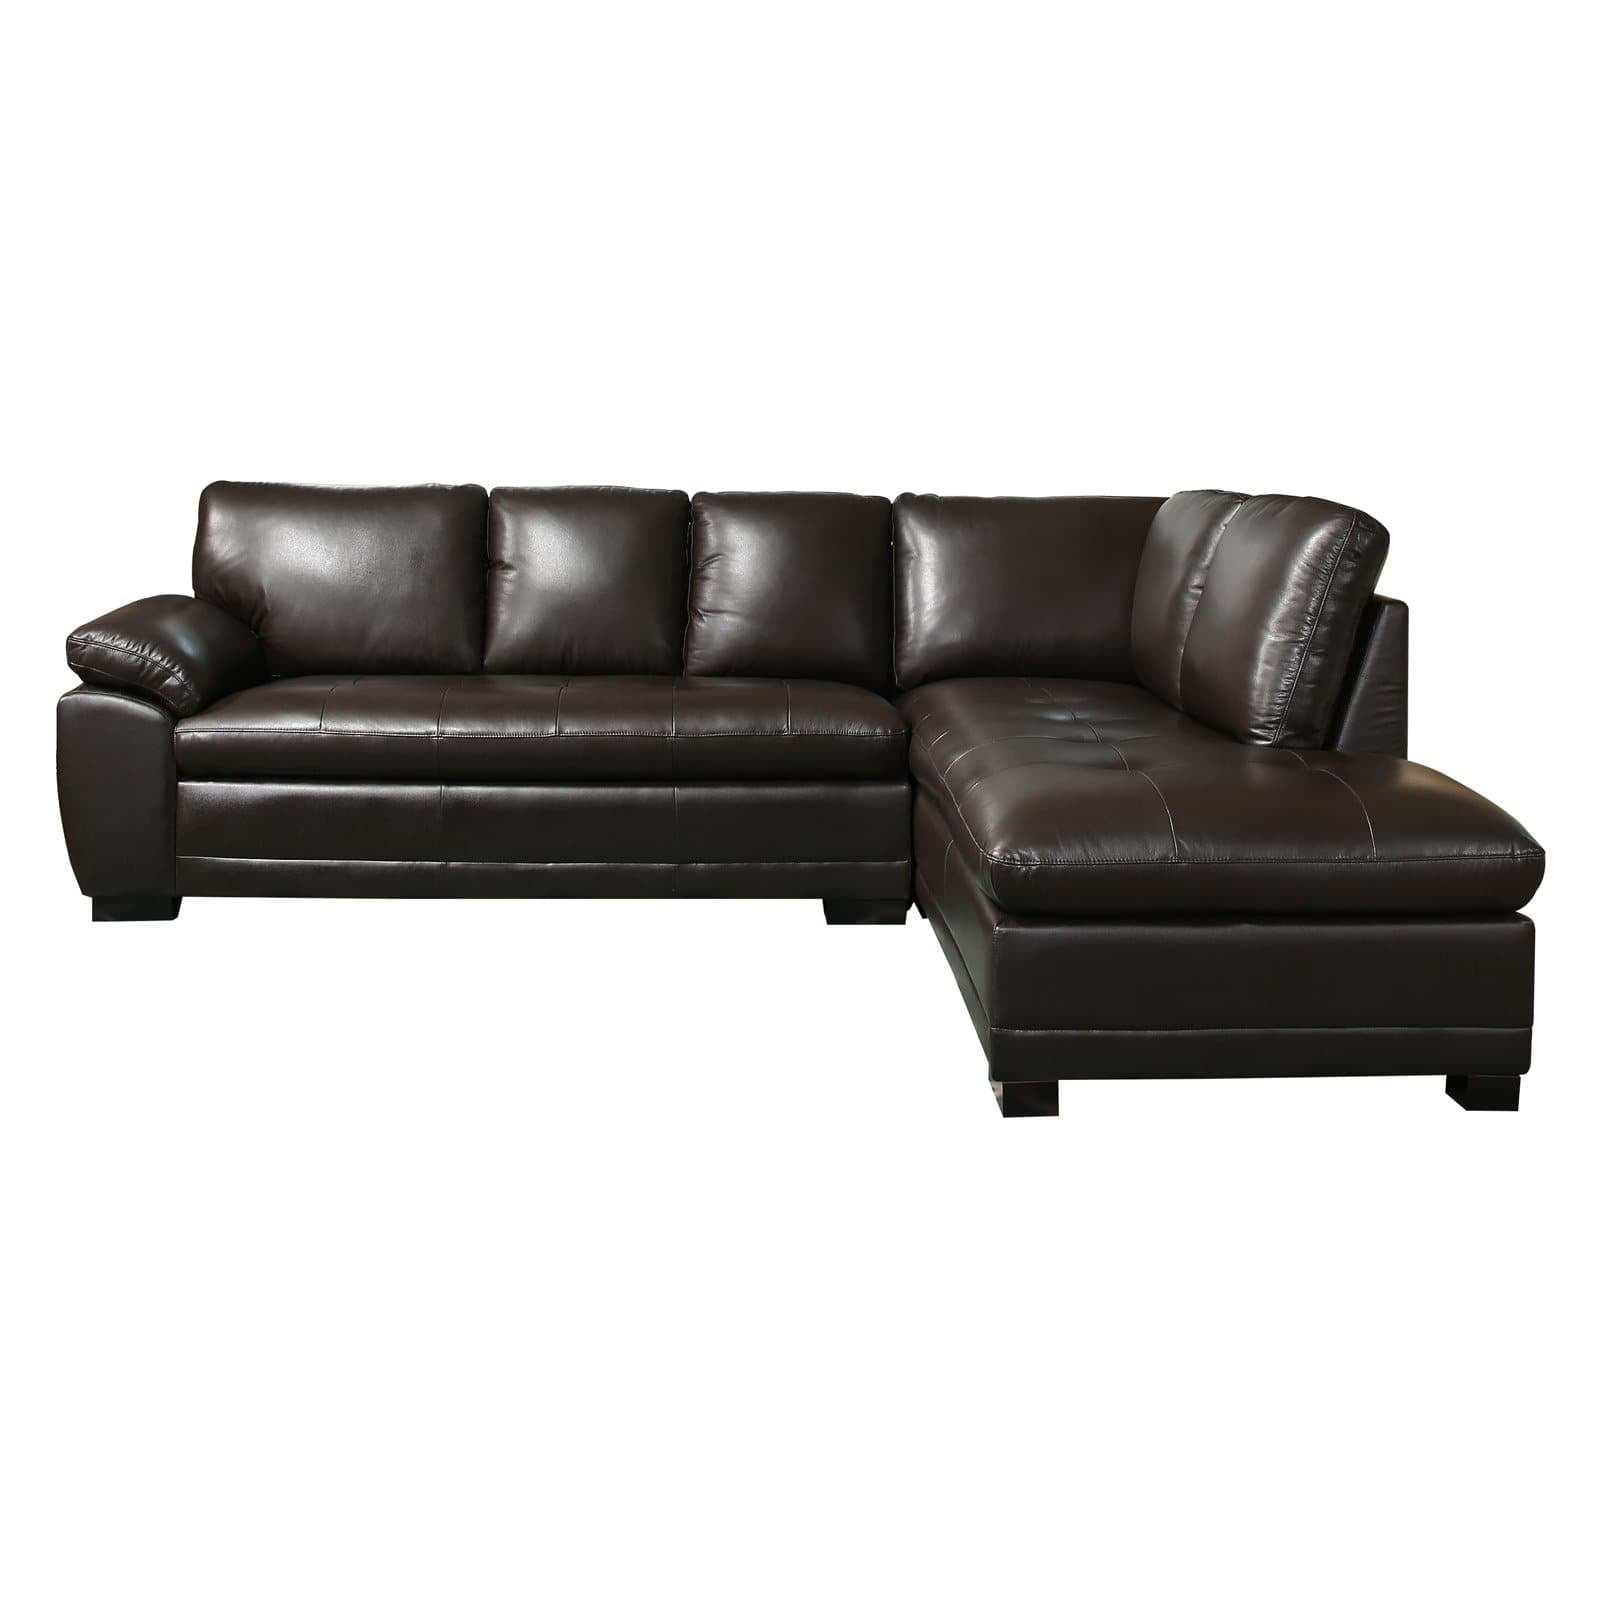 Abbyson Woodland Premium Italian, Brown Leather Sectional Chaise